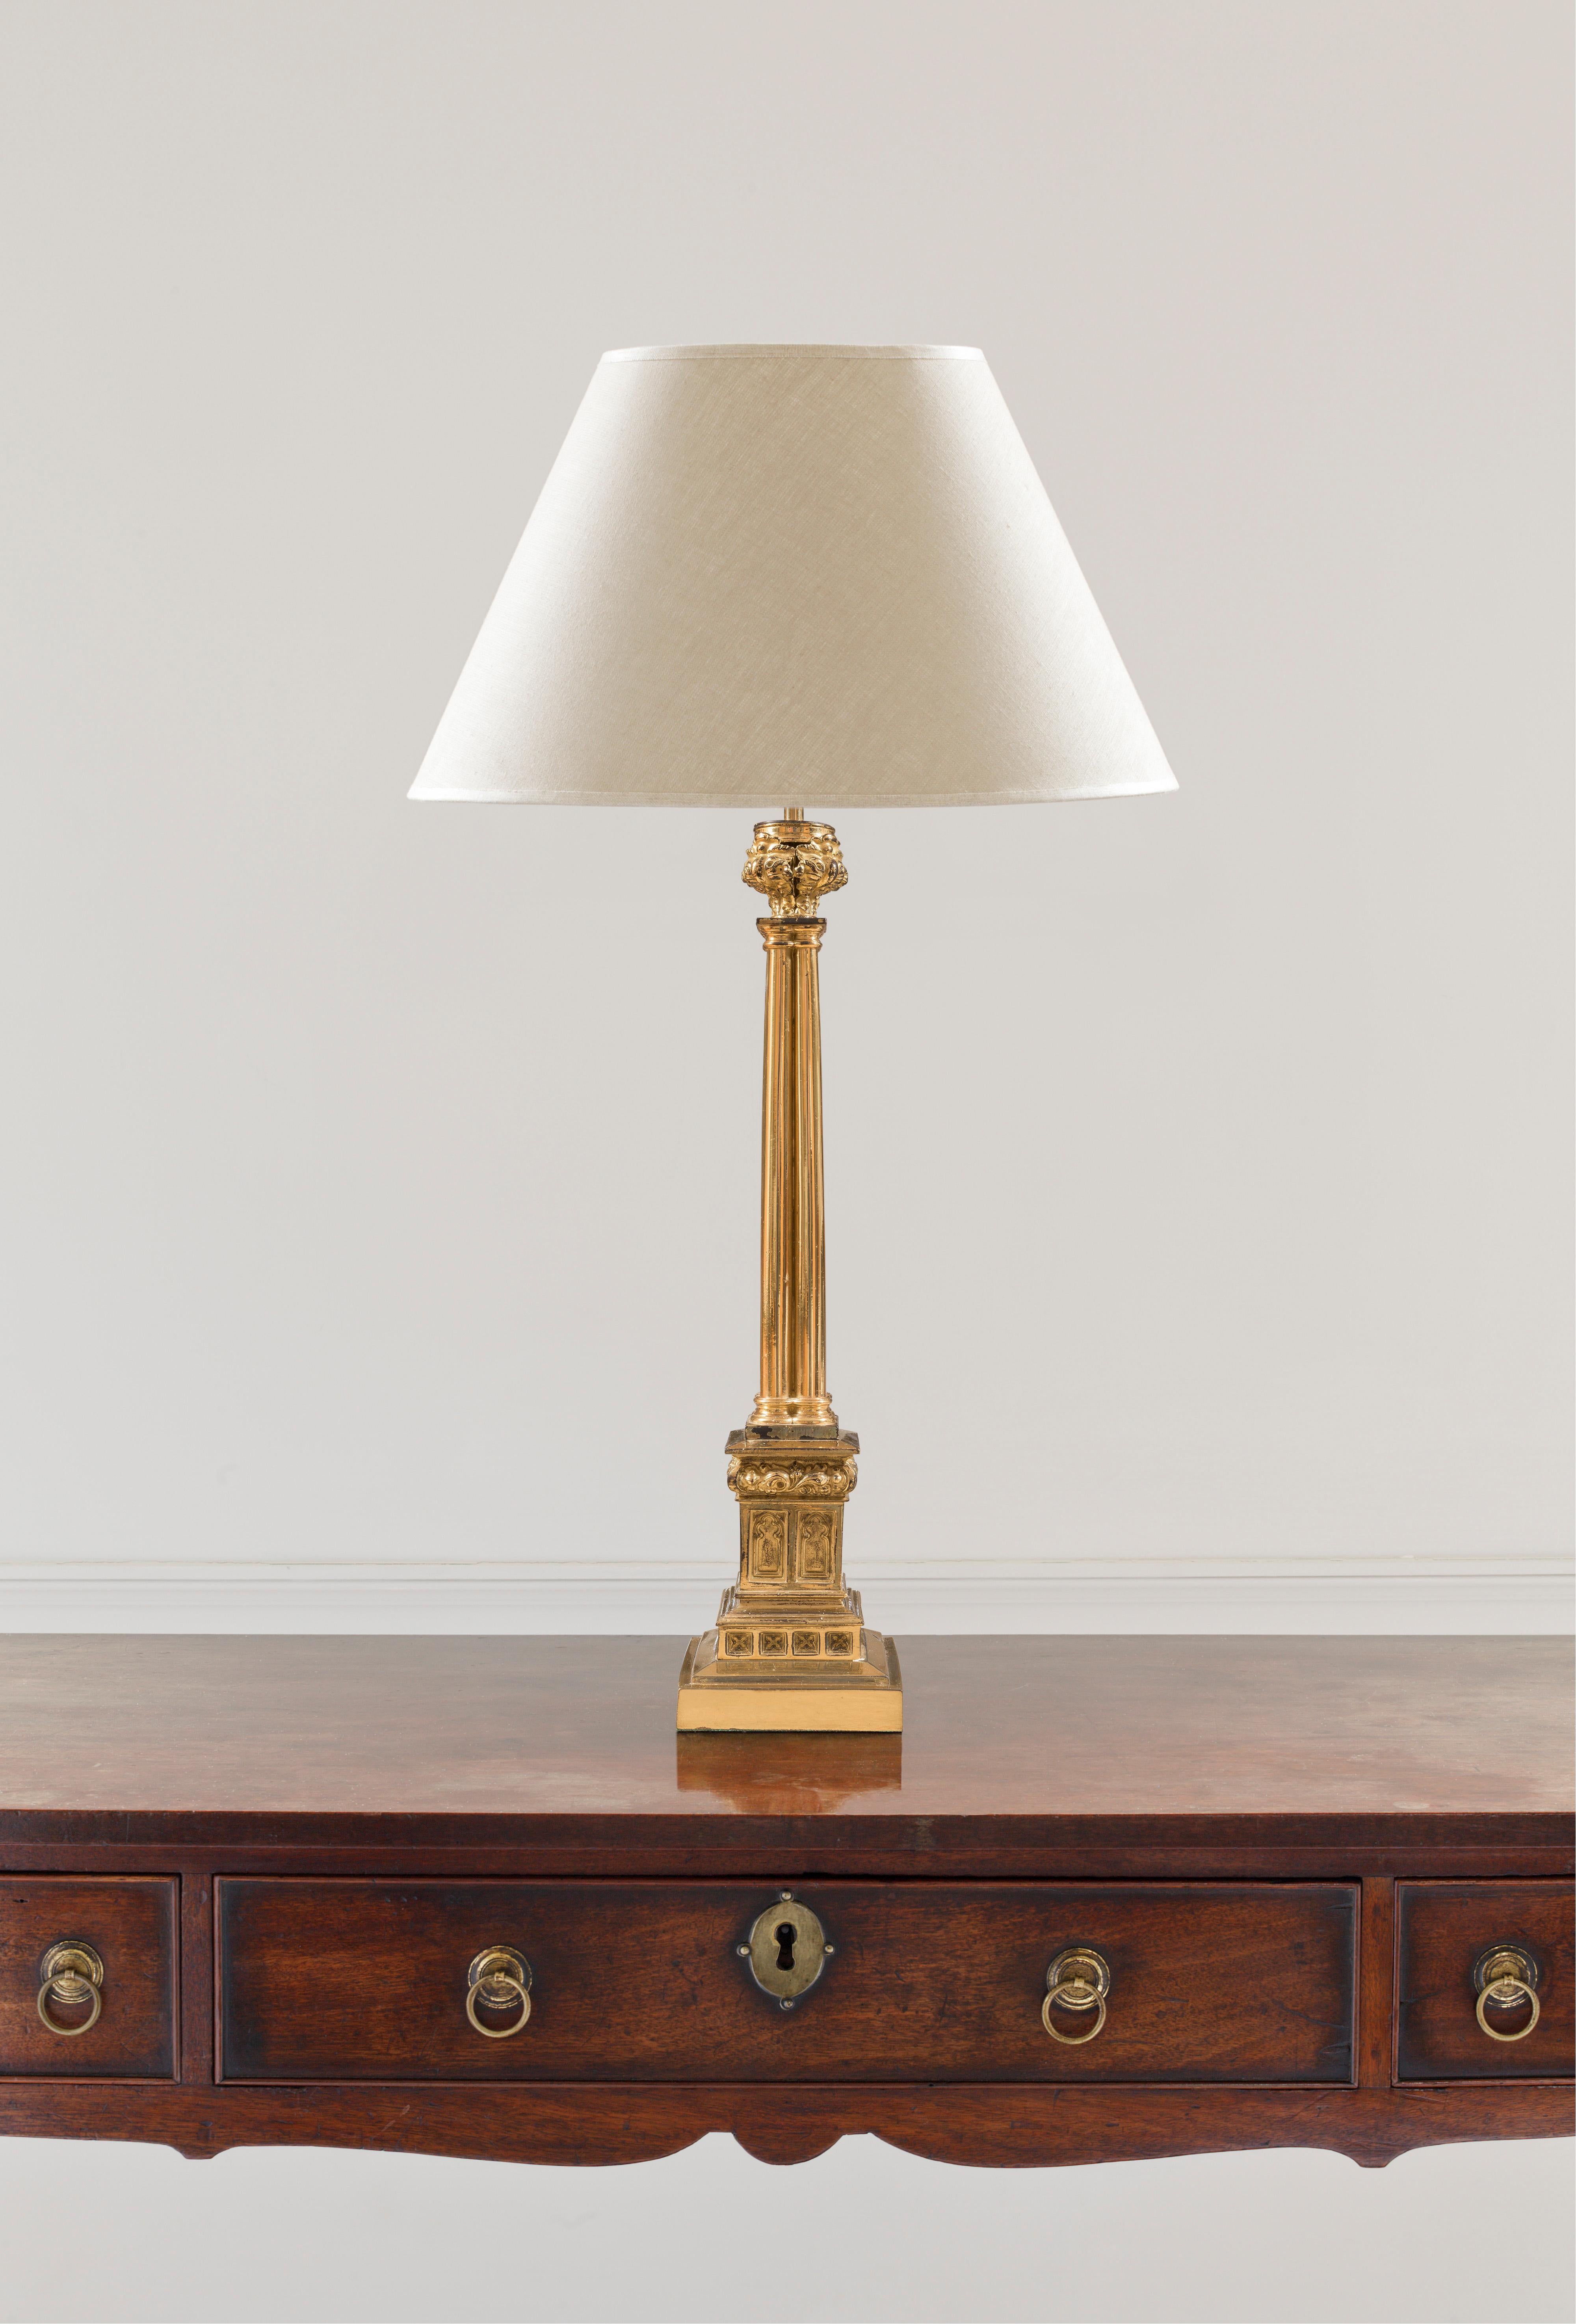 This polished bronze lamp of architectural form incorporates a foliate cap above a cathedral-like cluster of four tapering columns terminating in a detailed cast bronze pedestal, decorated in the Regency Gothic taste with stylized leaves, blind